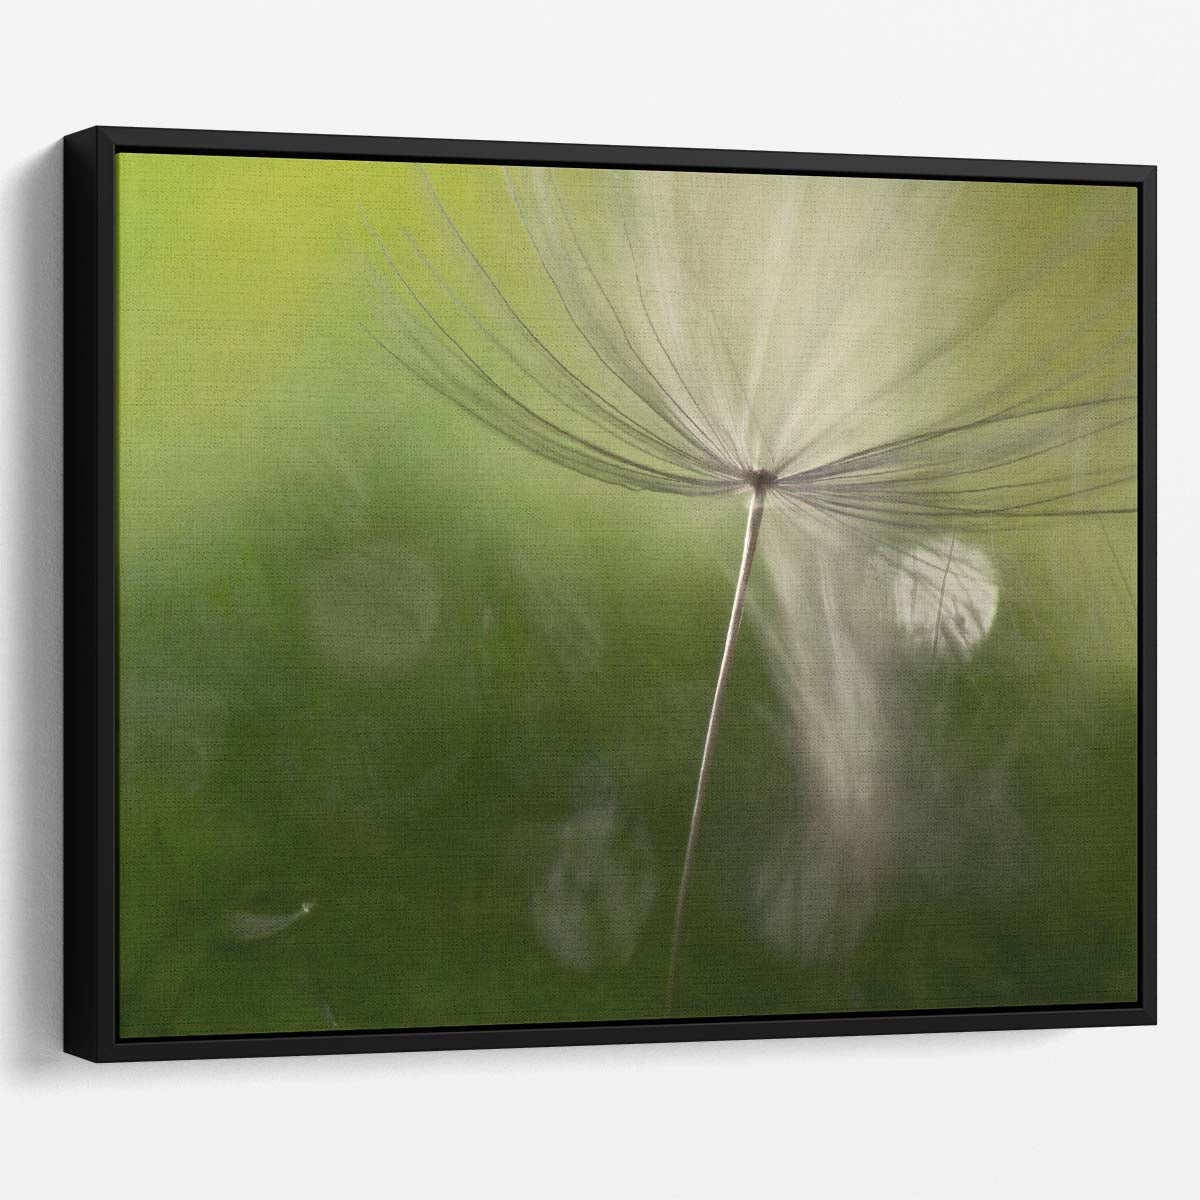 Delicate Green Dandelion Feather Macro Floral Wall Art by Luxuriance Designs. Made in USA.